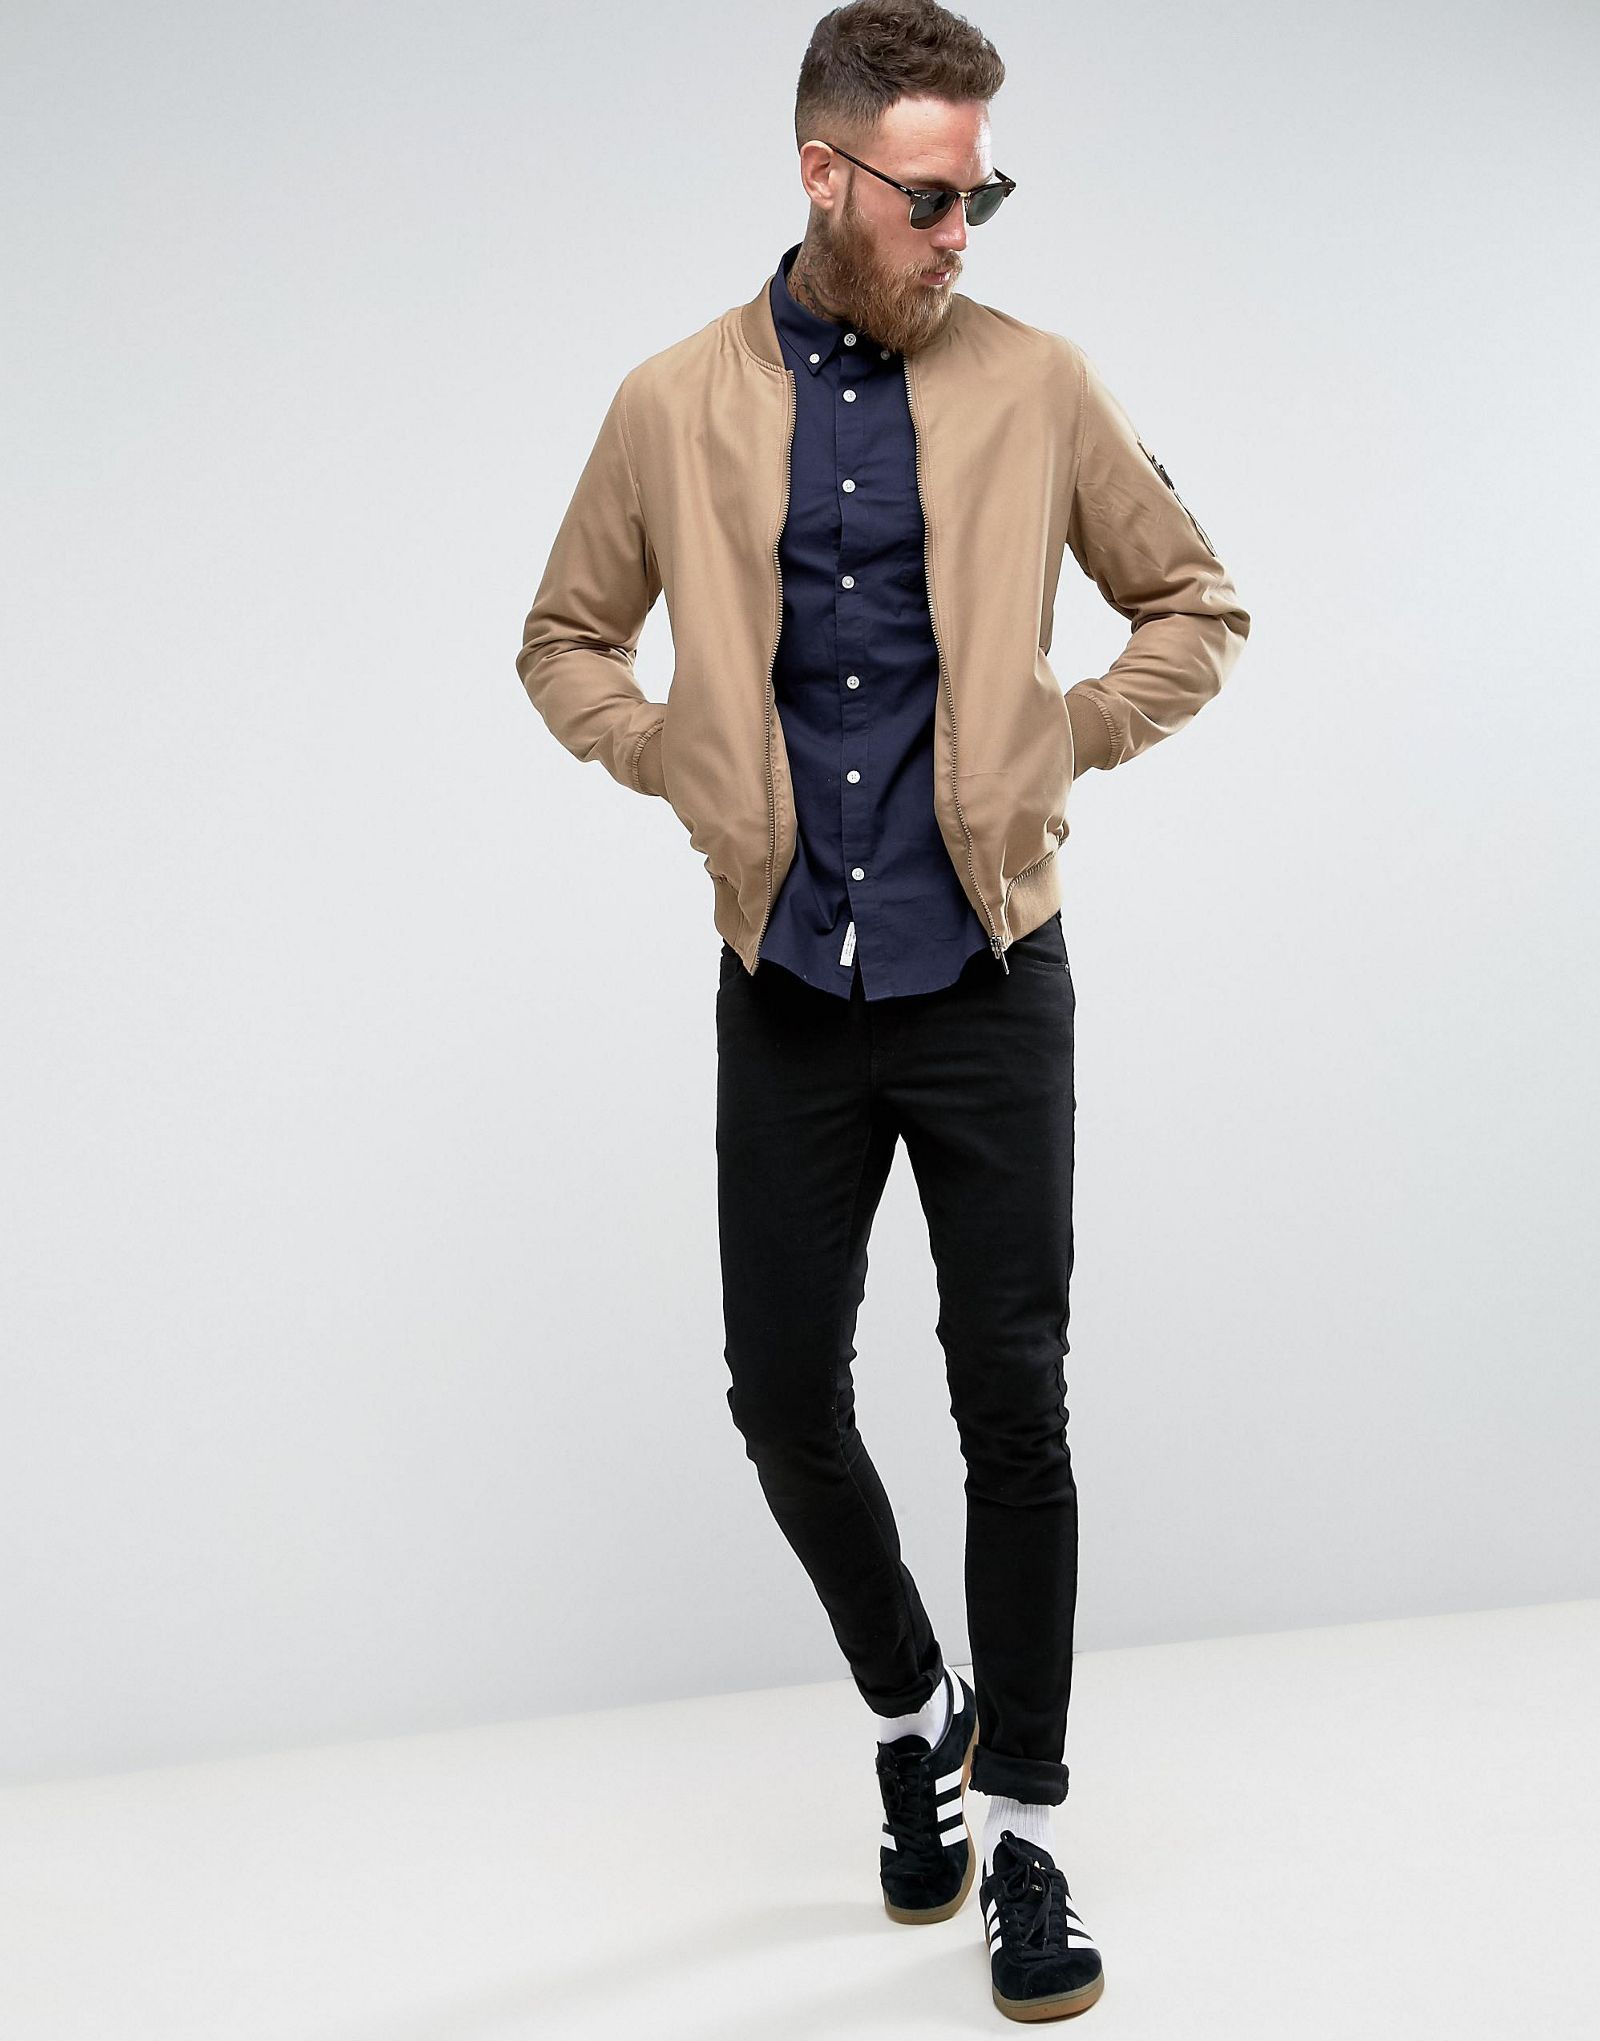 River Island Oxford Shirt In Navy Blue In Regular Fit